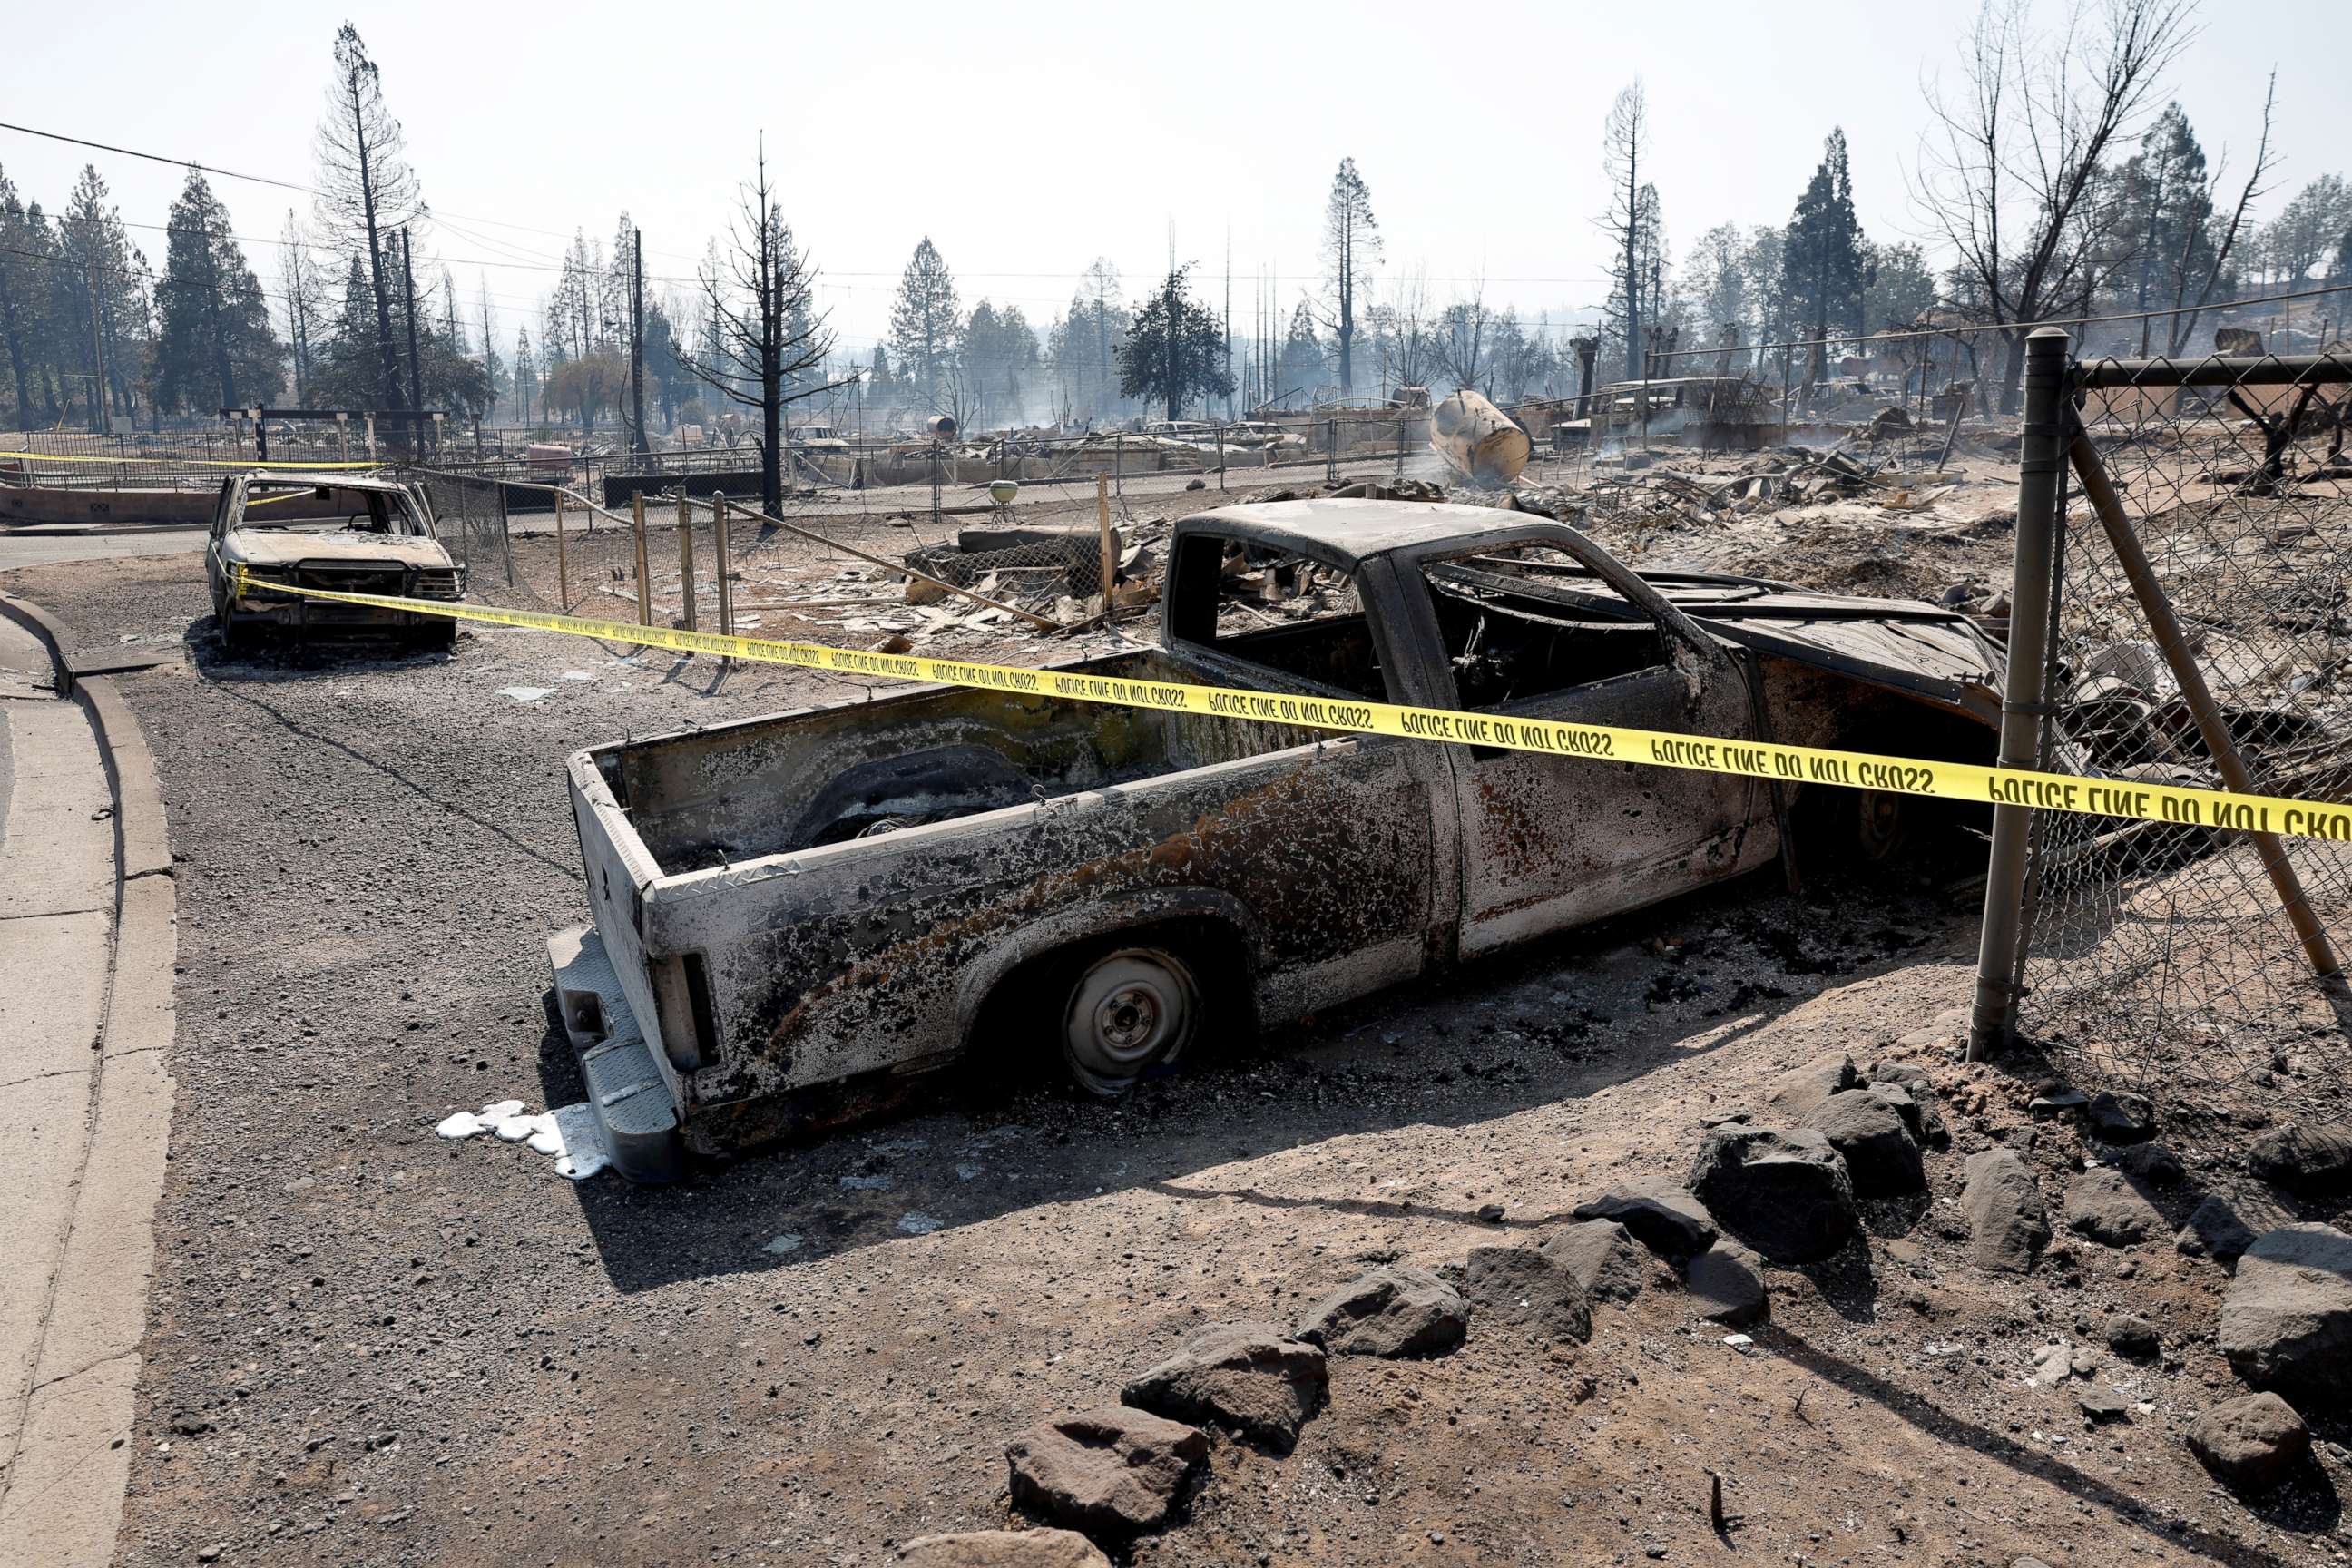 PHOTO: Crime scene tape barricades the area near burned cars in the aftermath of the Mill Fire in Weed, California, Sept. 3, 2022.